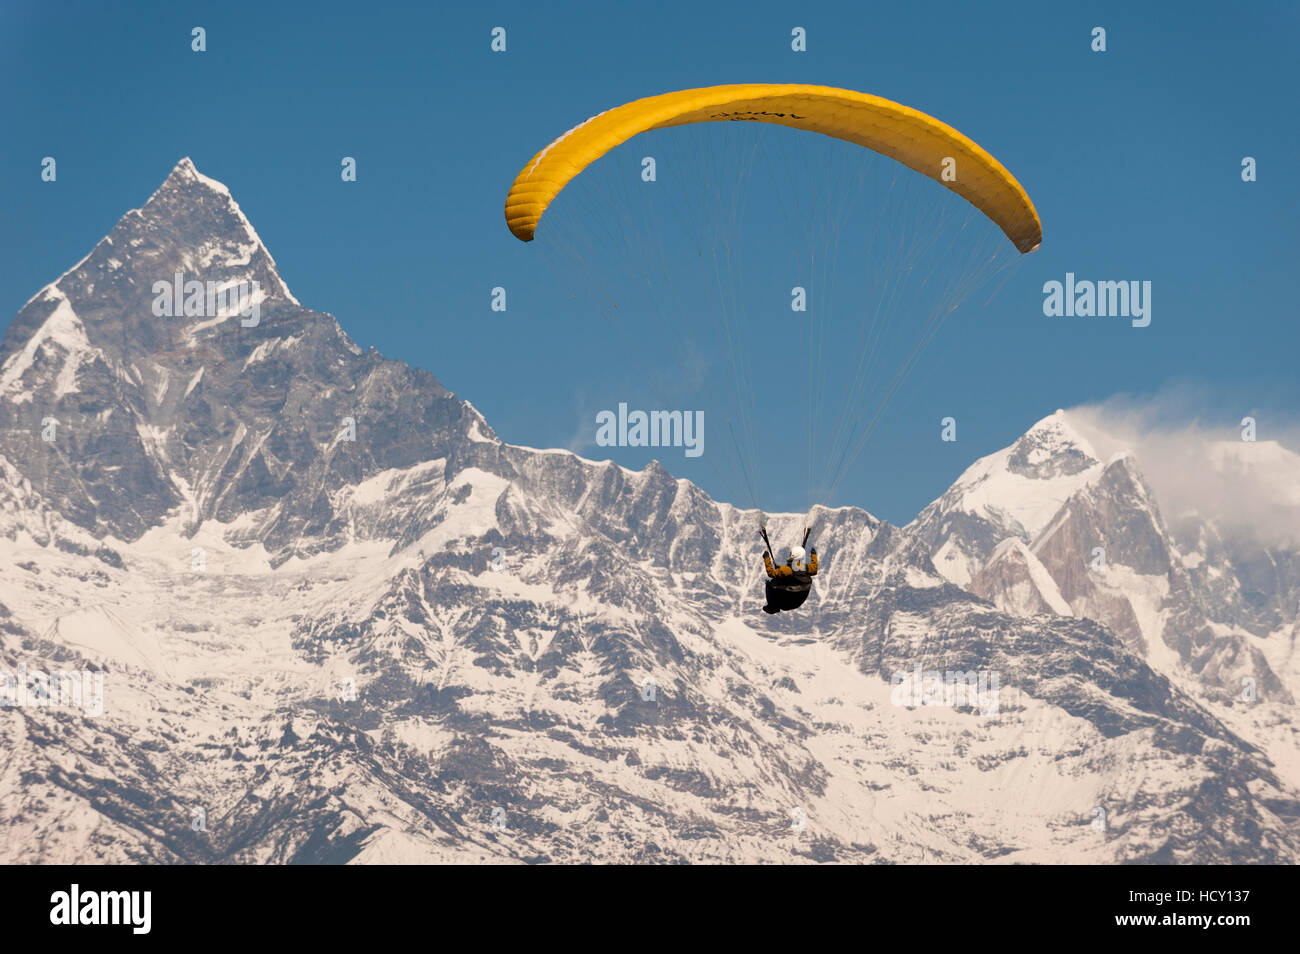 A paraglider carves a turn with views of Machapuchare (Fishtail mountain) in the distance, Nepal Stock Photo